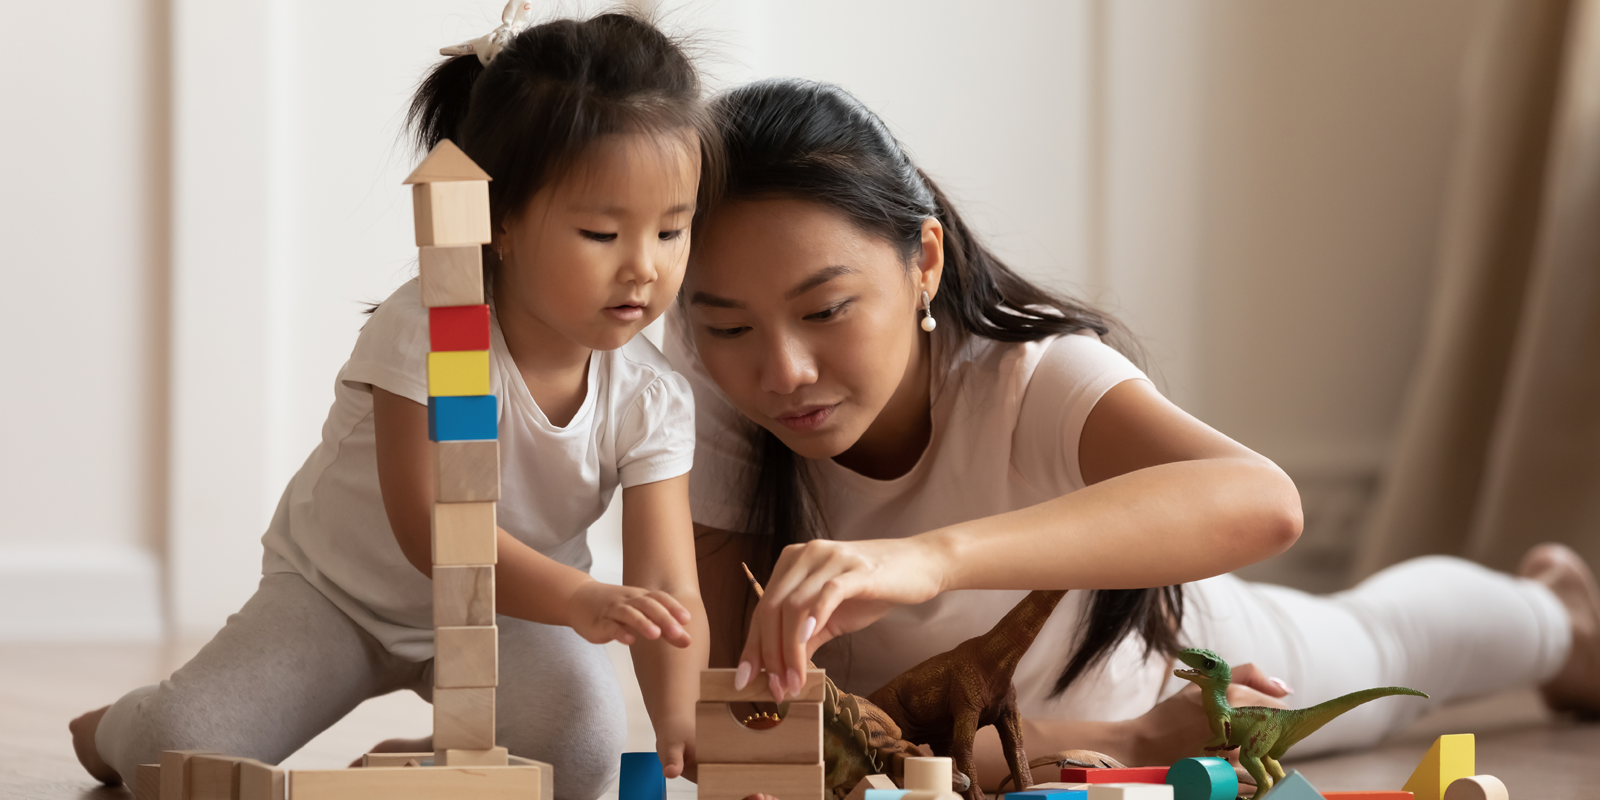 Mother and young daughter playing with blocks.